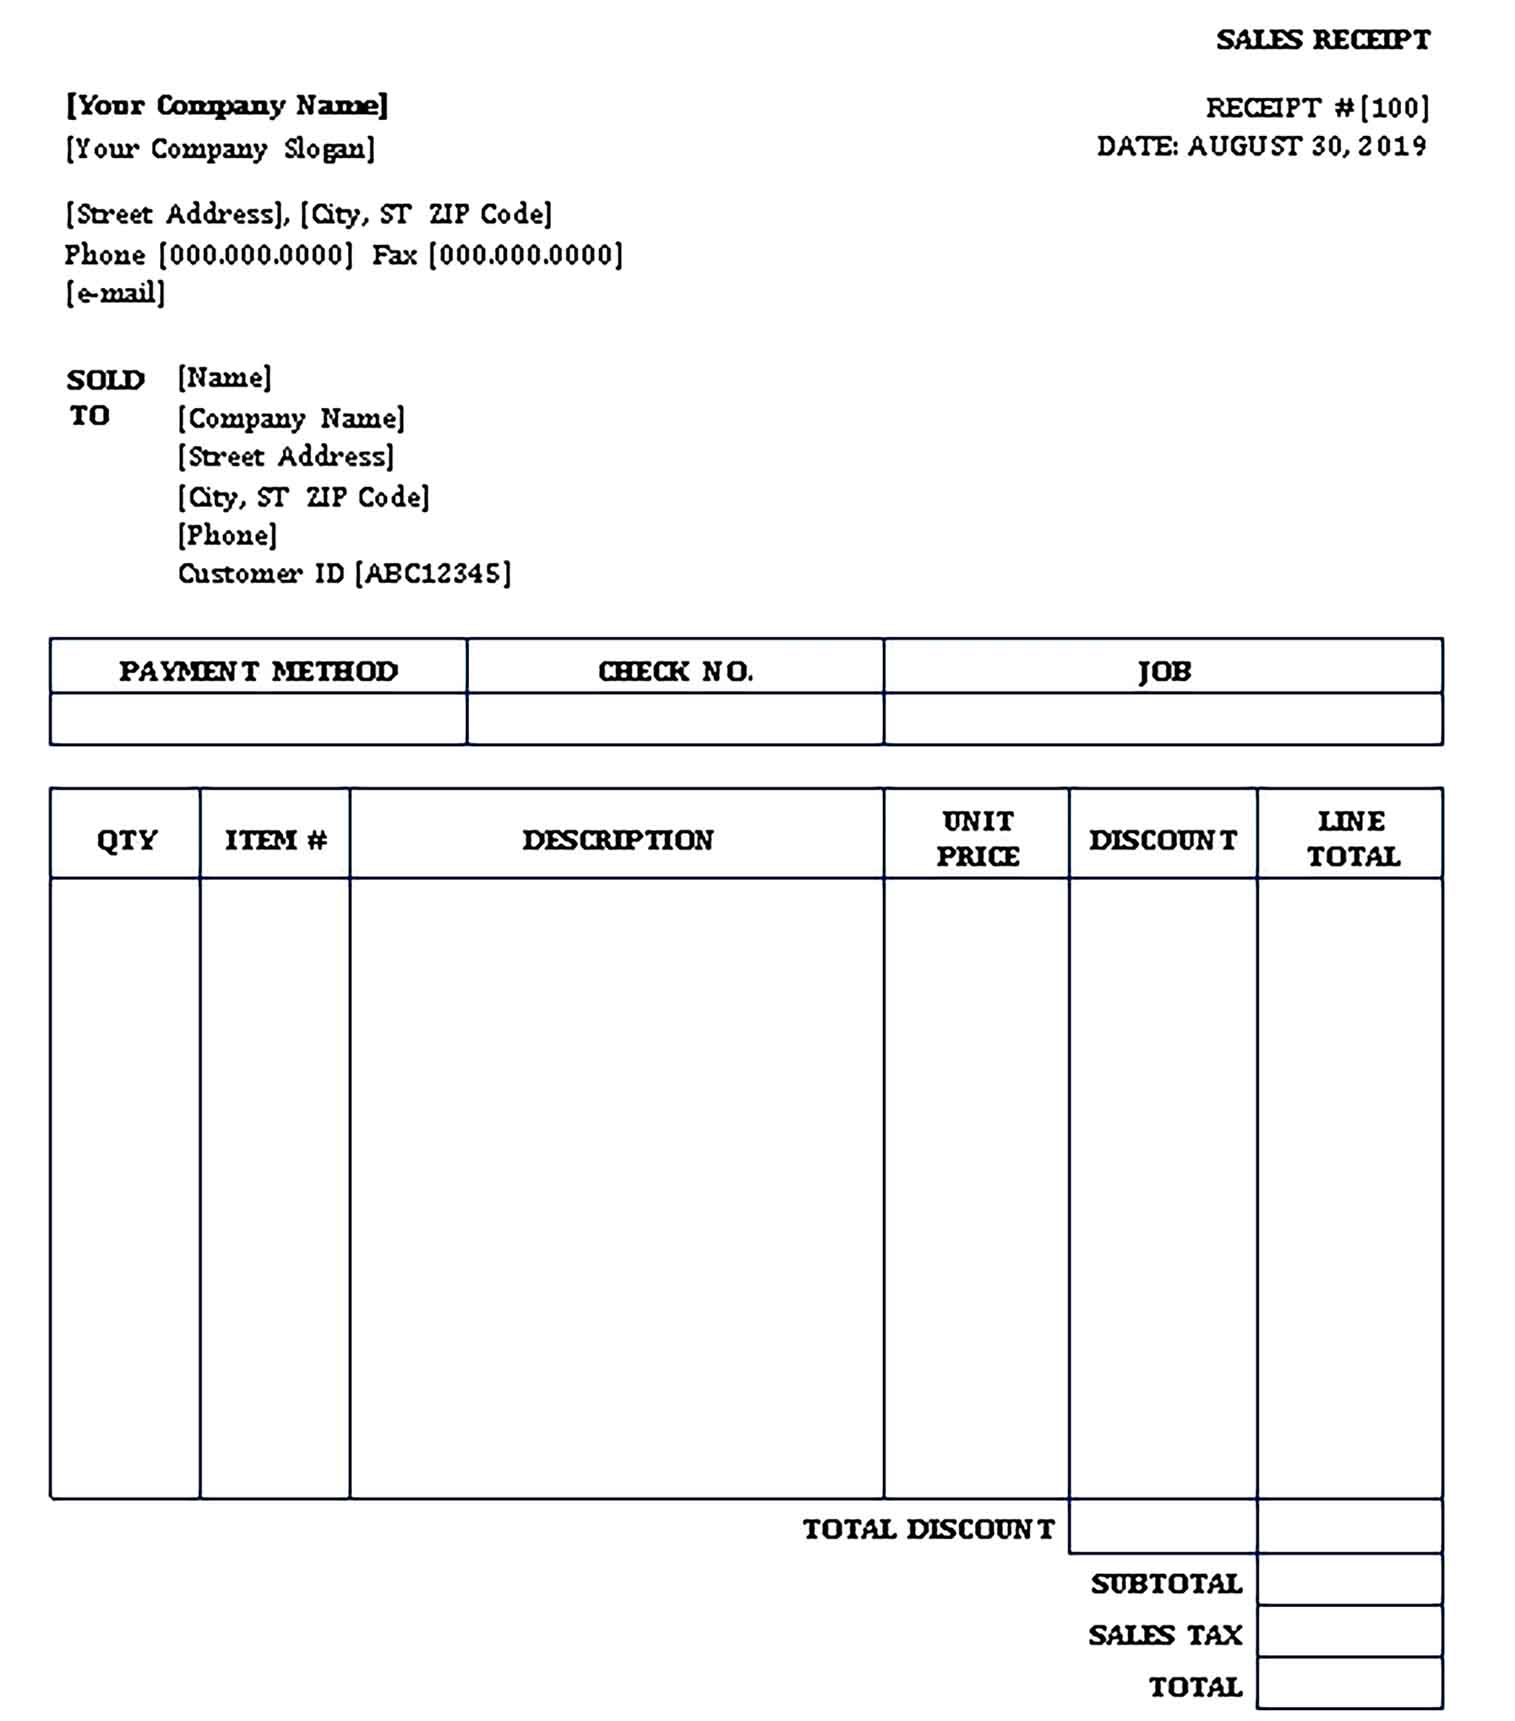 Sample Sales Receipt in Word Templates 1